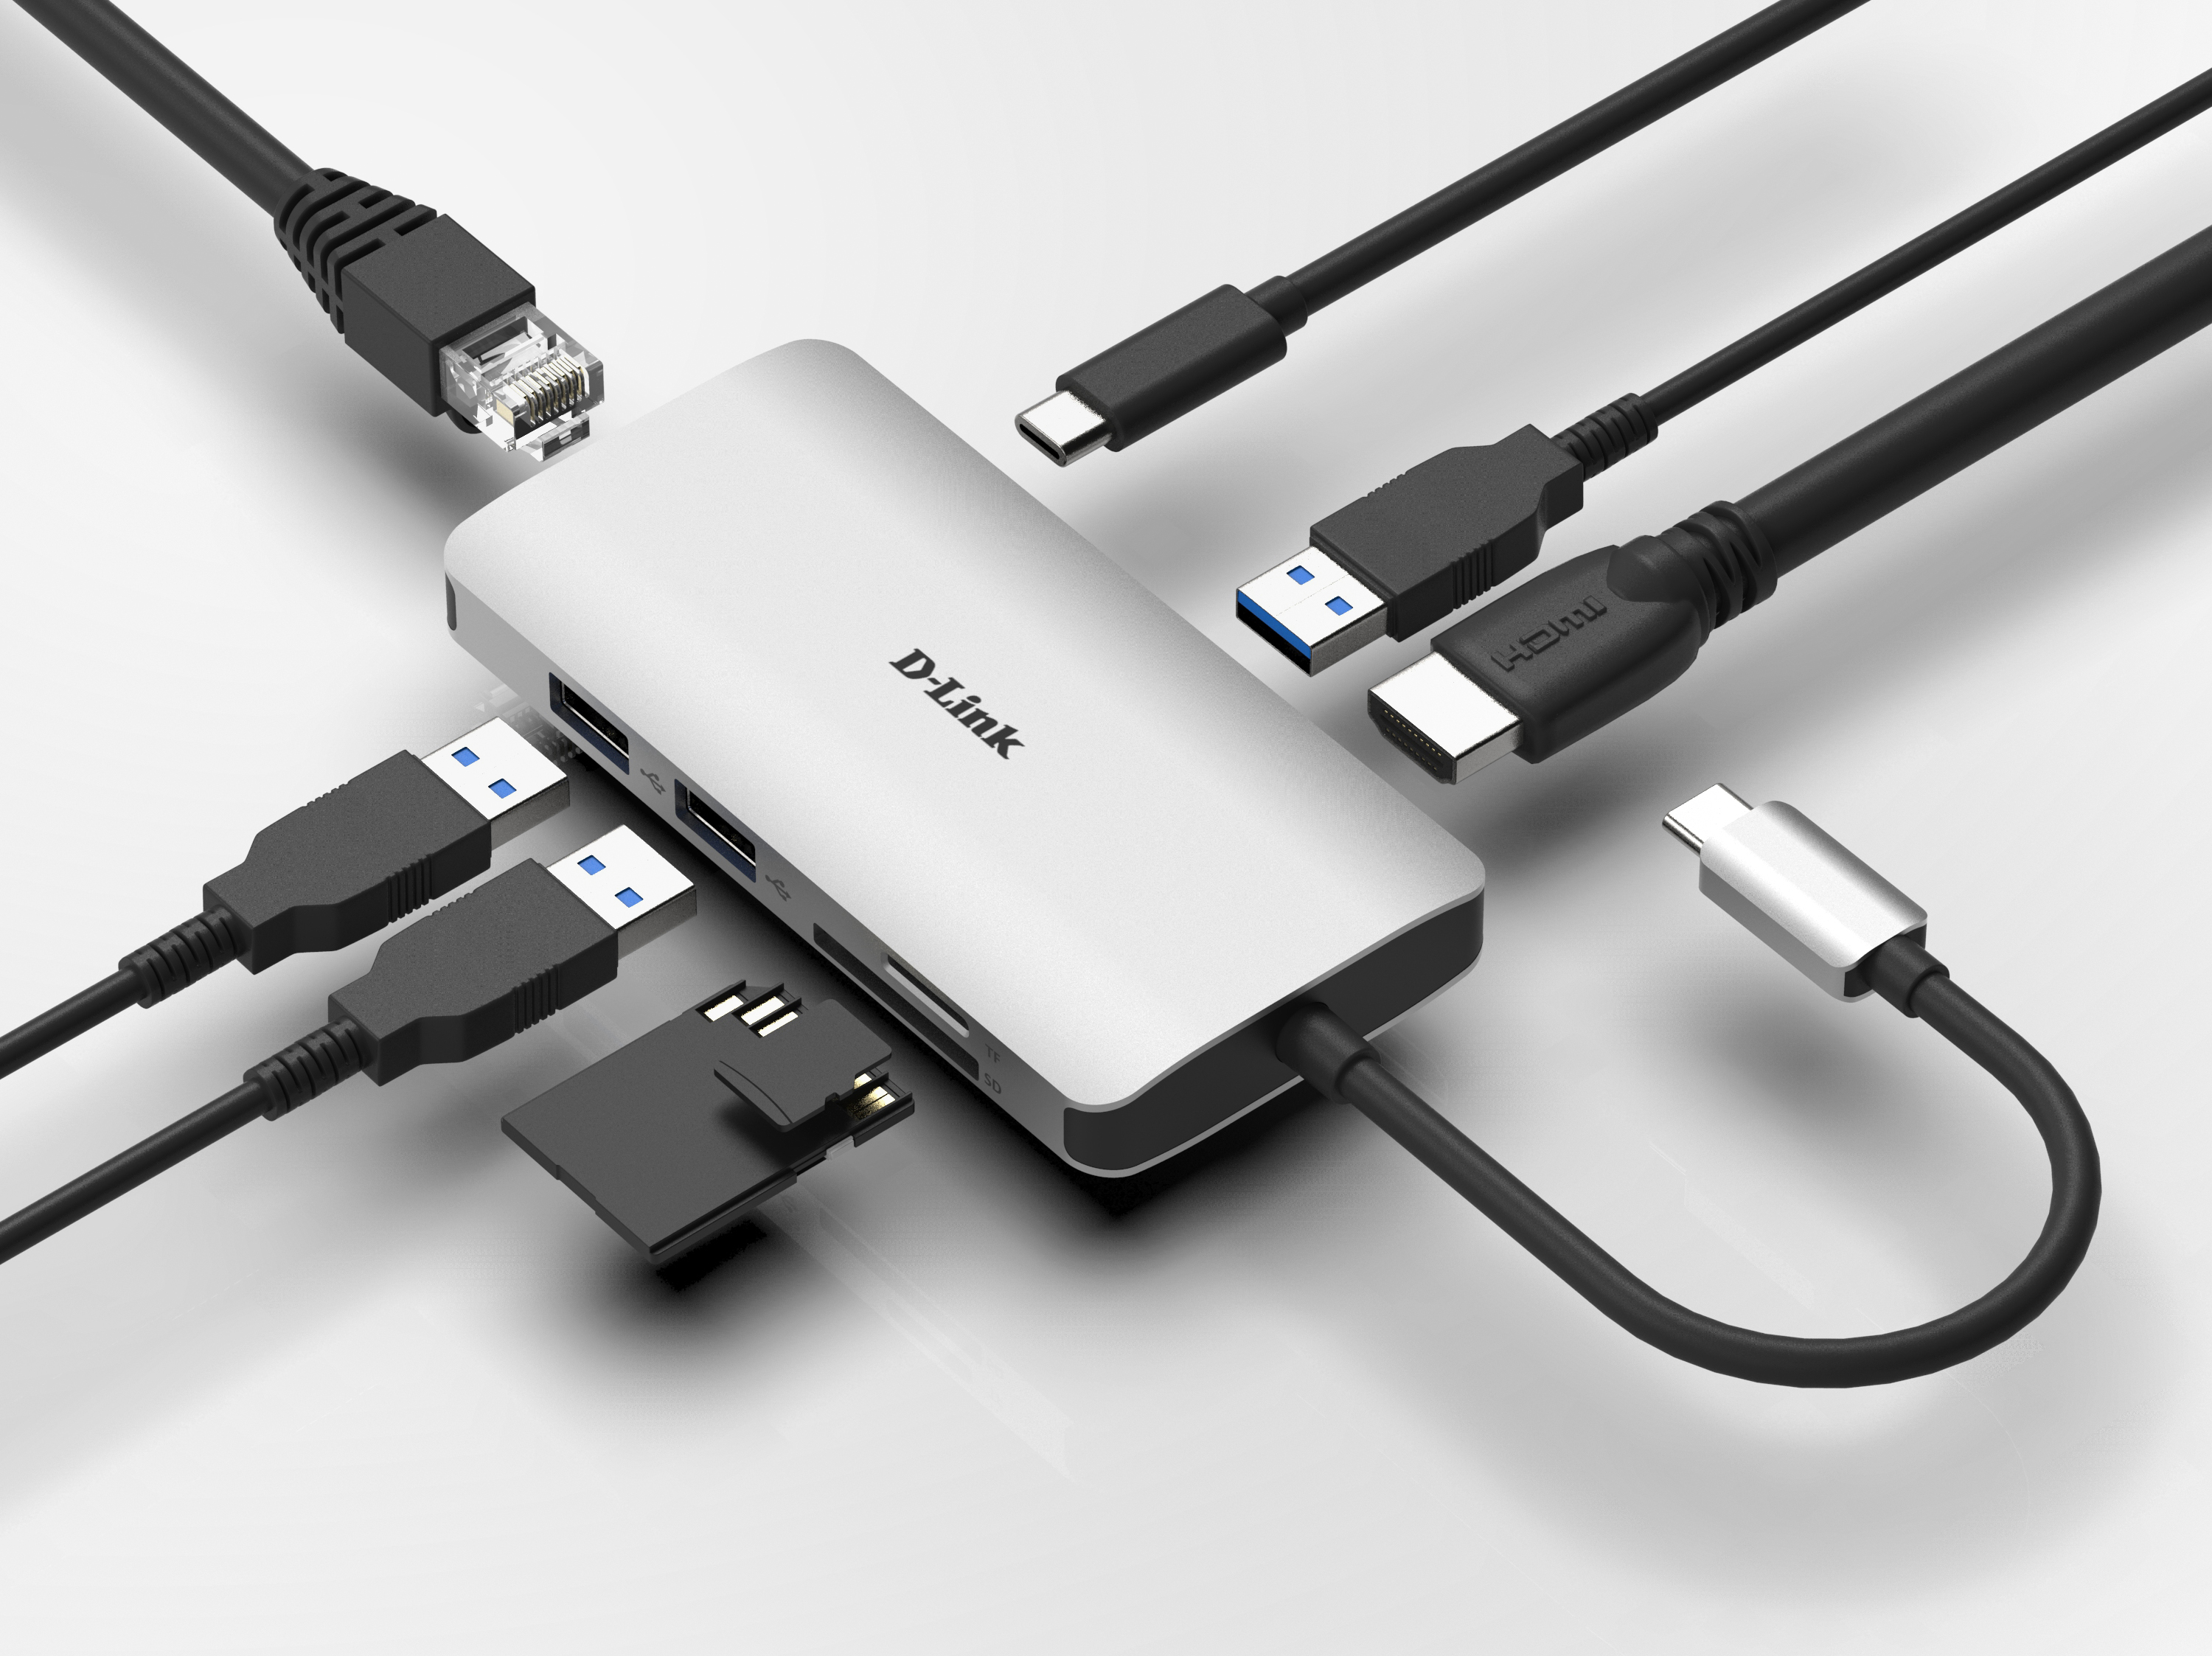 DUB-M810 8-in-1 USB-C Hub with HDMI/Ethernet/Card Reader/Power Delivery - example connections